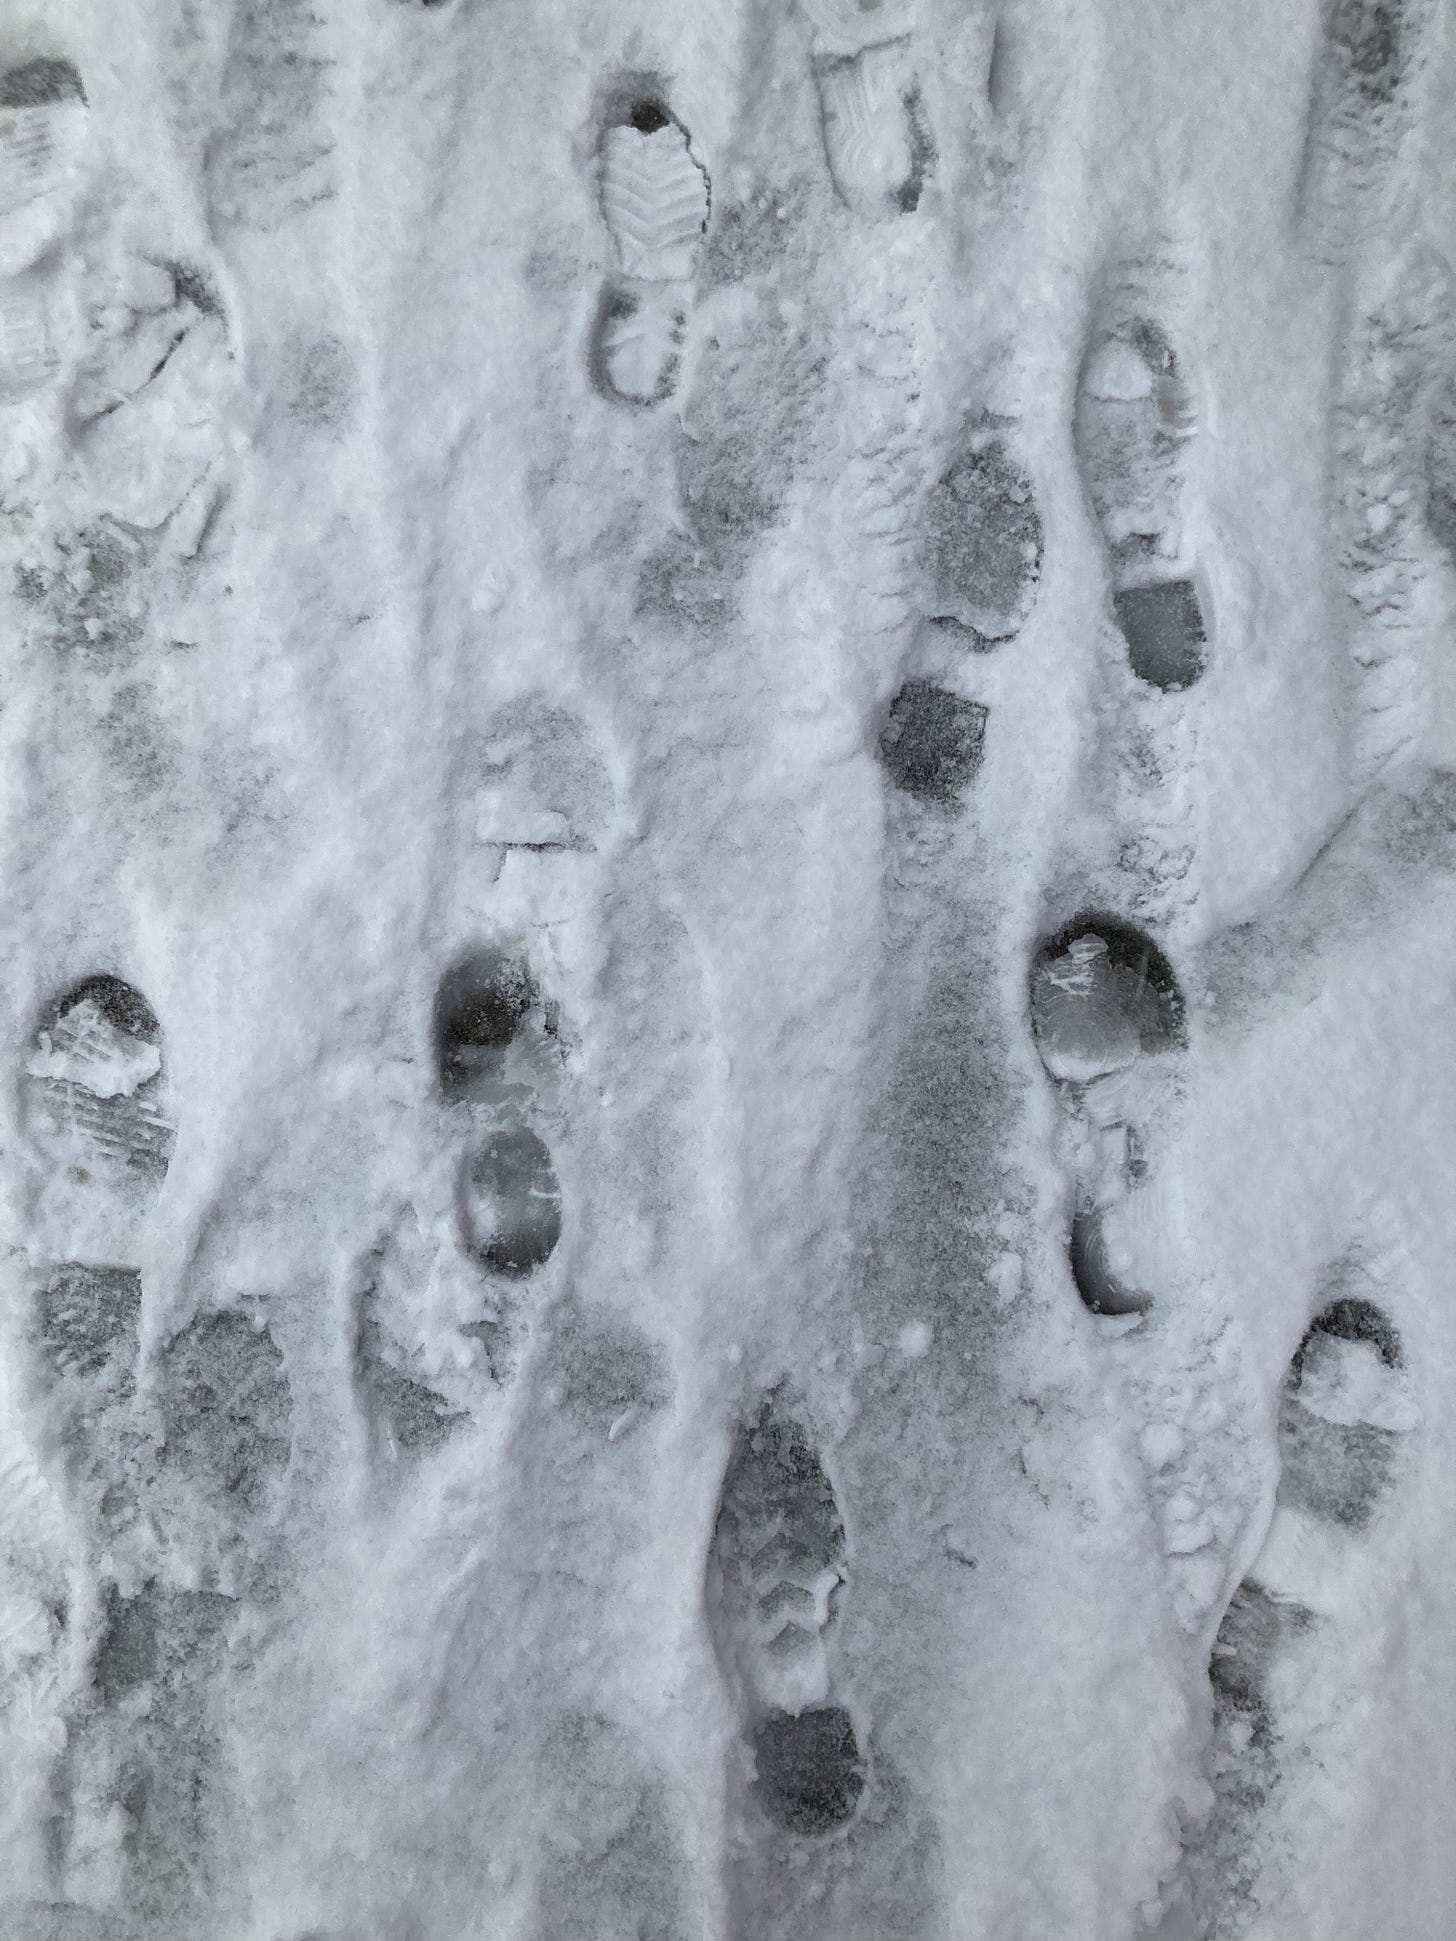 footprints left in a thin layer of snow on a sidewalk